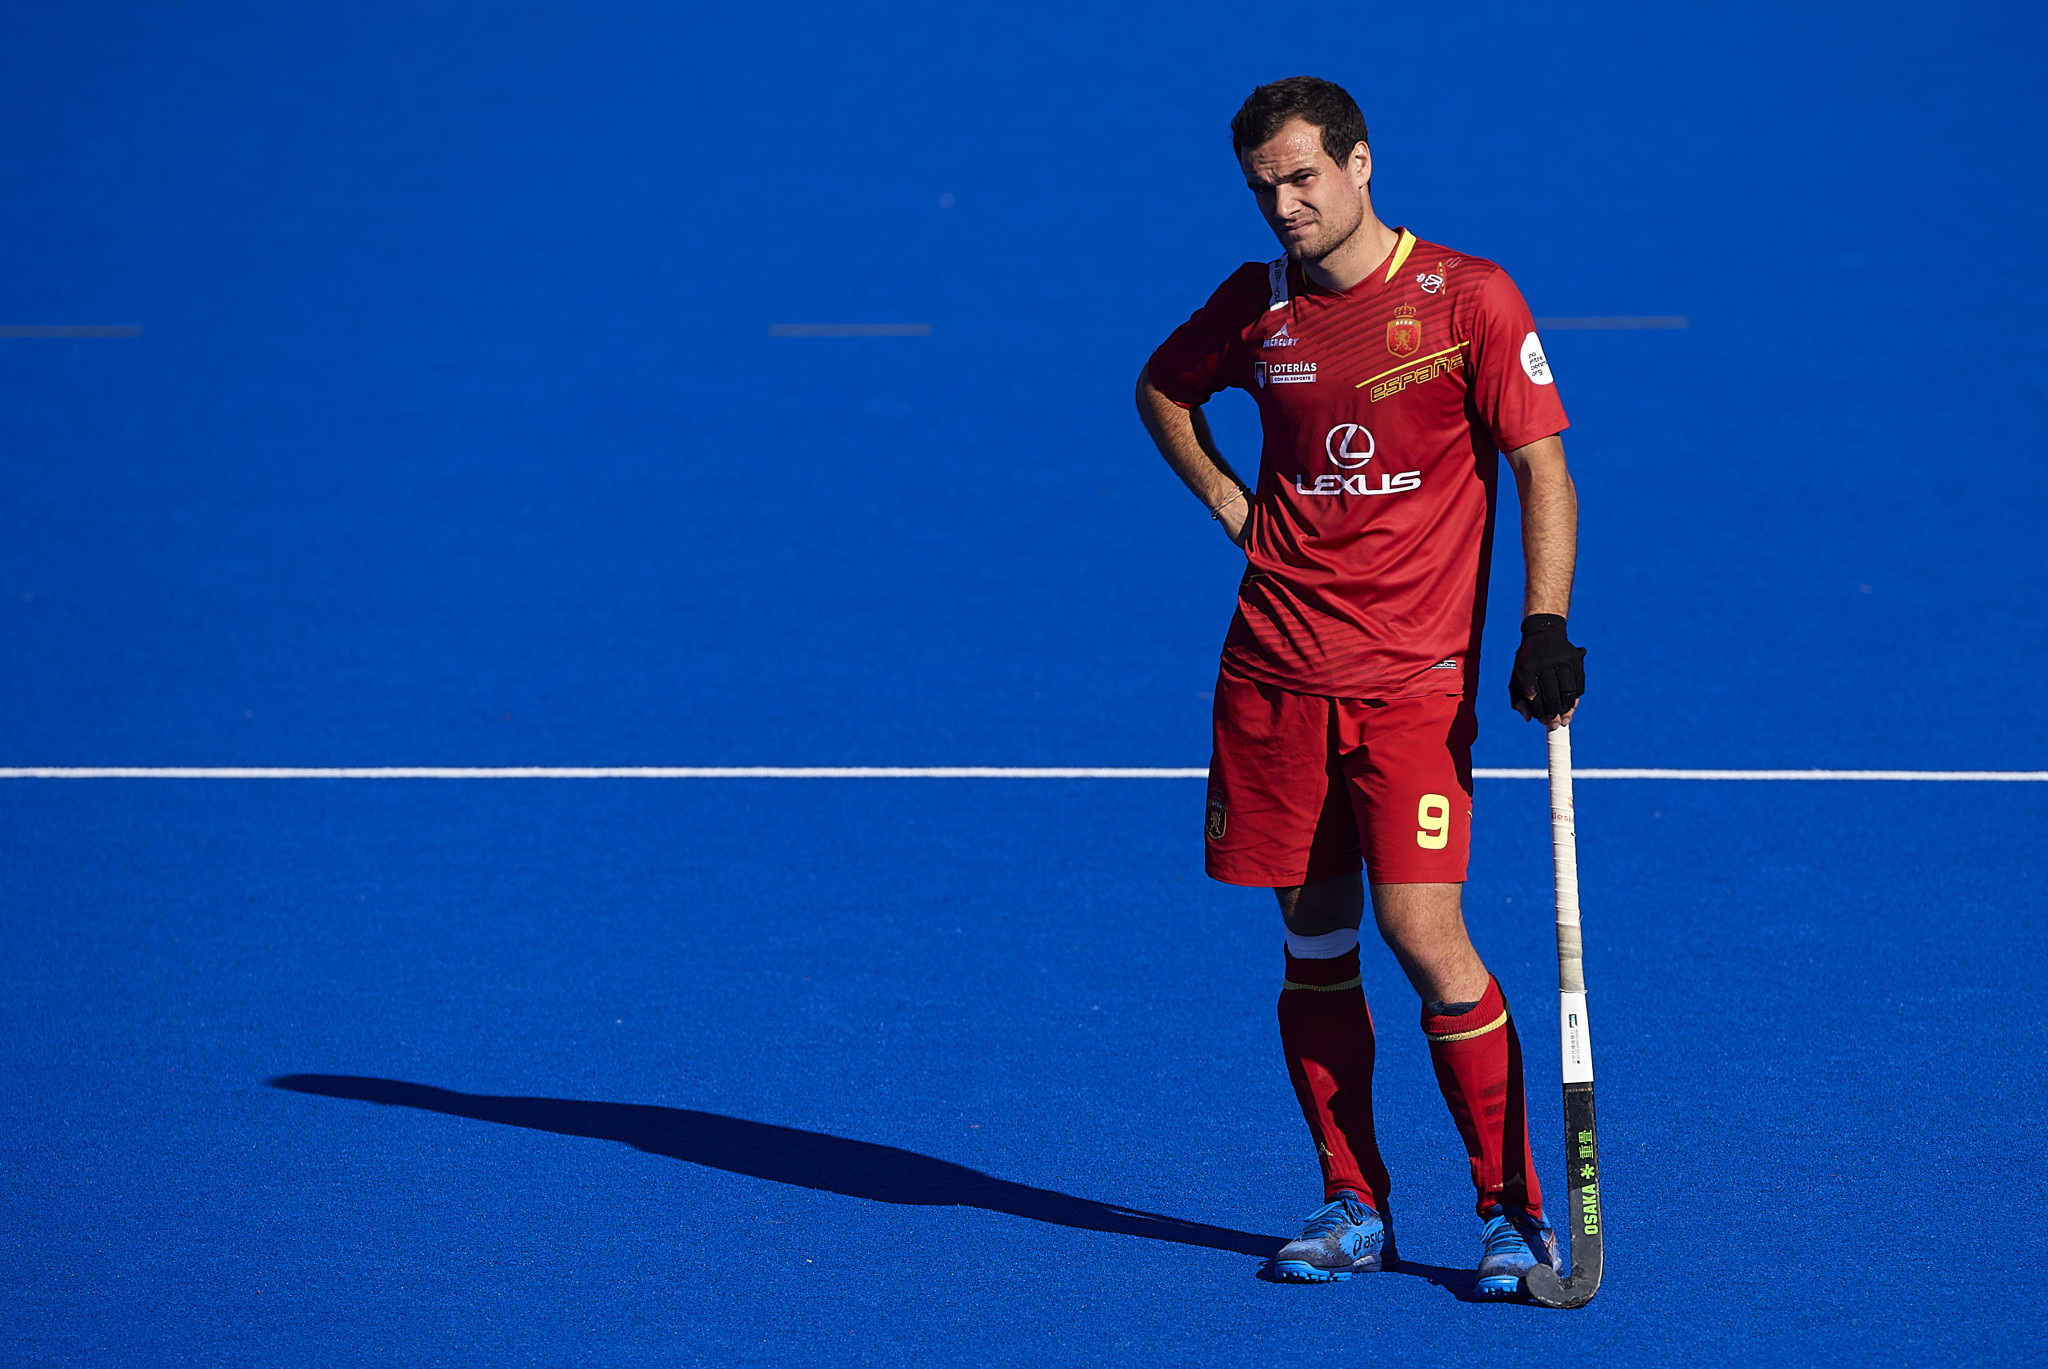 Spain score five past Wales as India and England share points at FIH Hockey World Cup